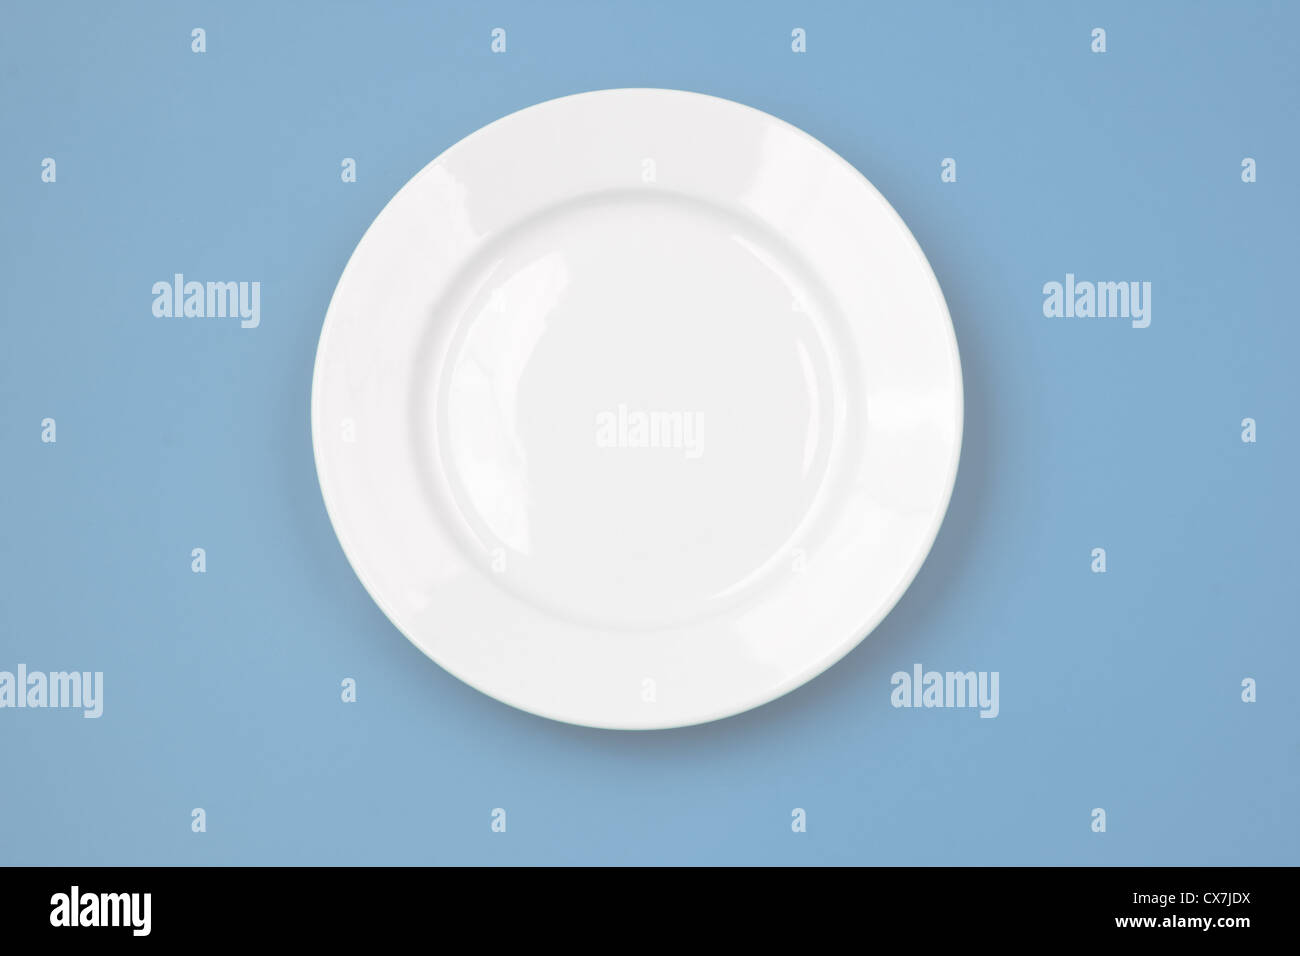 White round plate on sky blue background Stock Photo